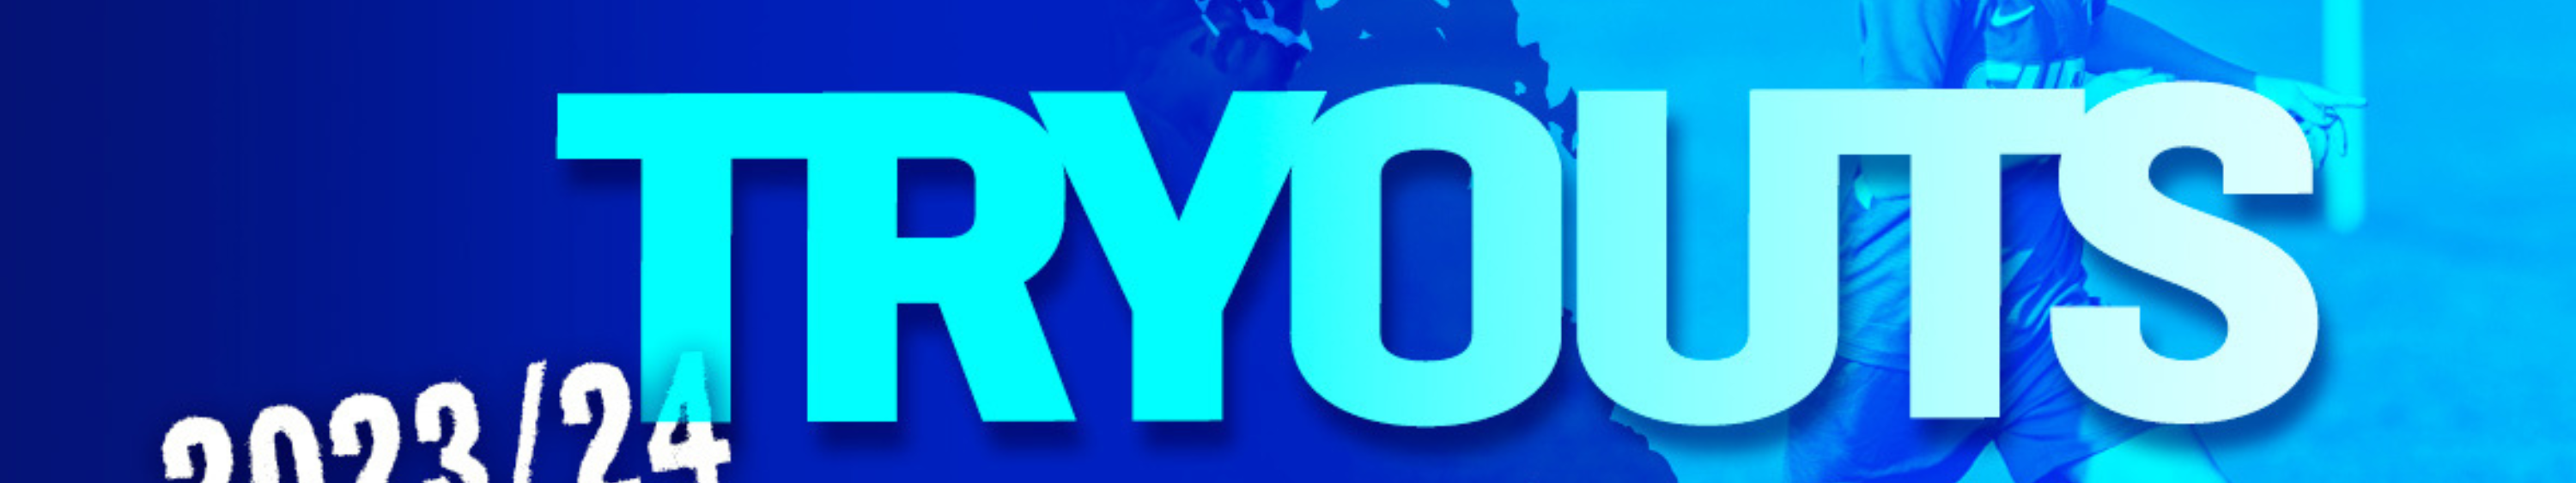 Tryout Banner